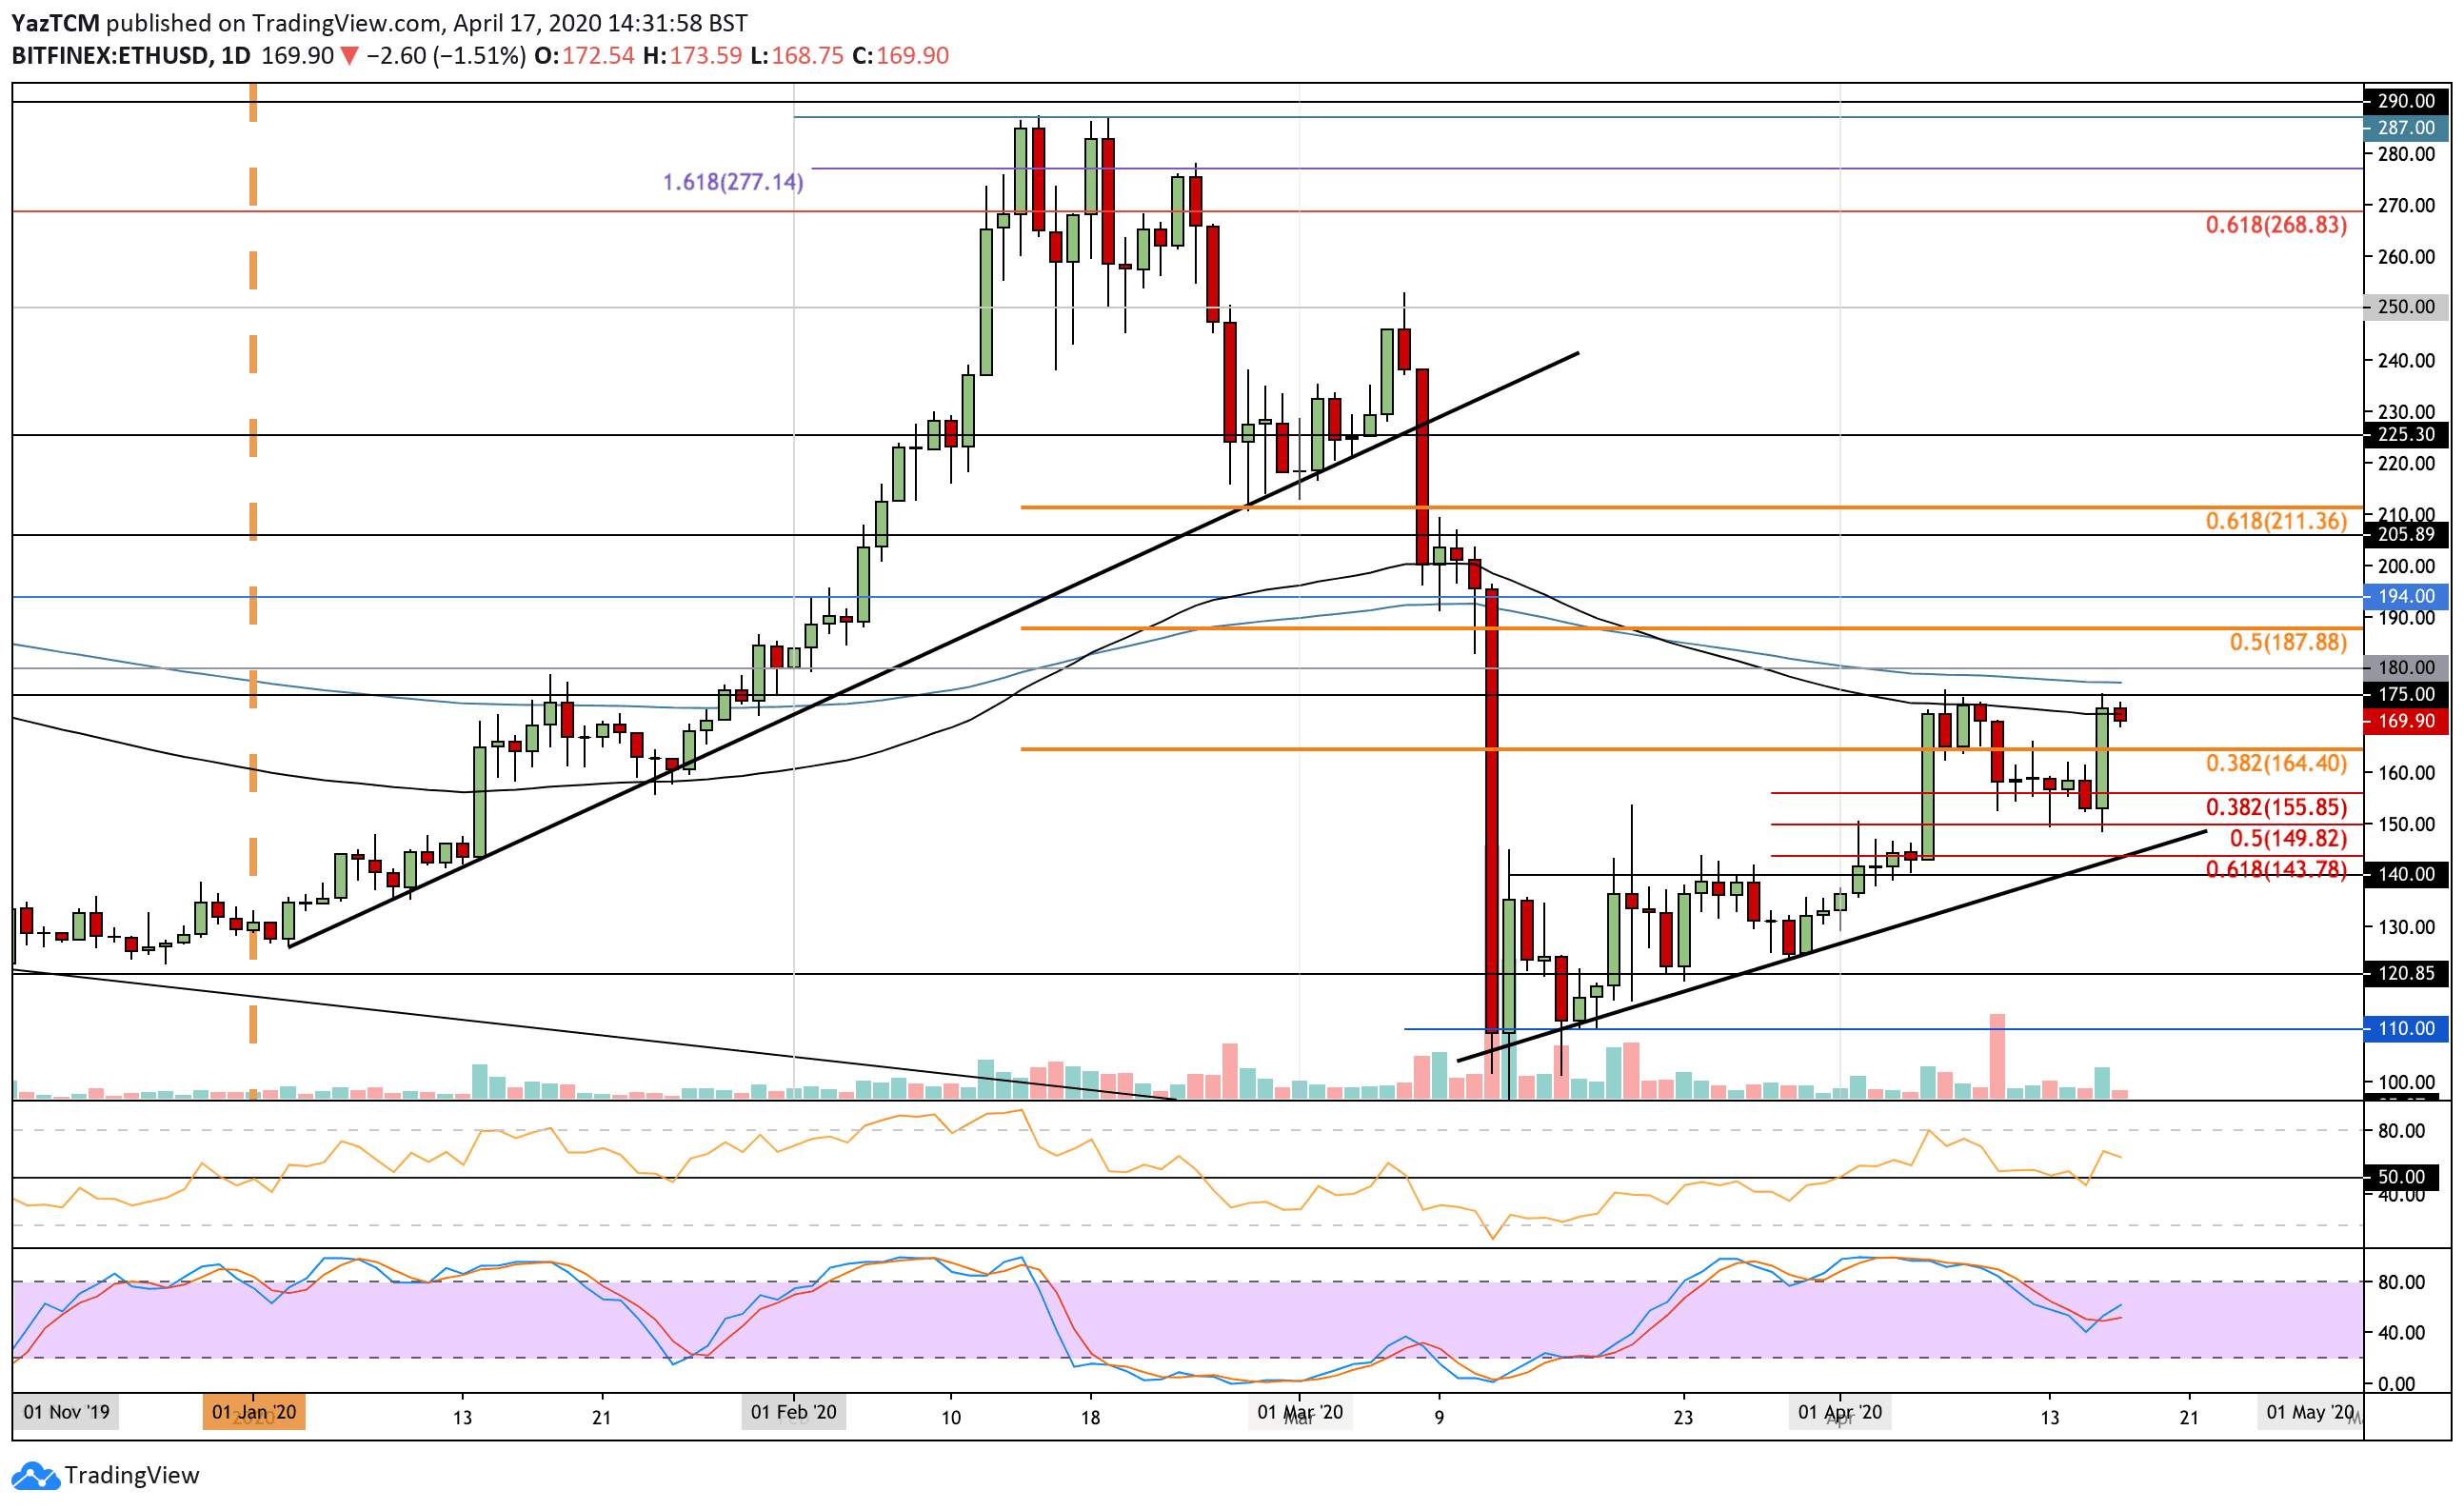 Crypto Price Analysis & Overview April 17th: Bitcoin, Ethereum, Ripple, Binance Coin, And Chainlink